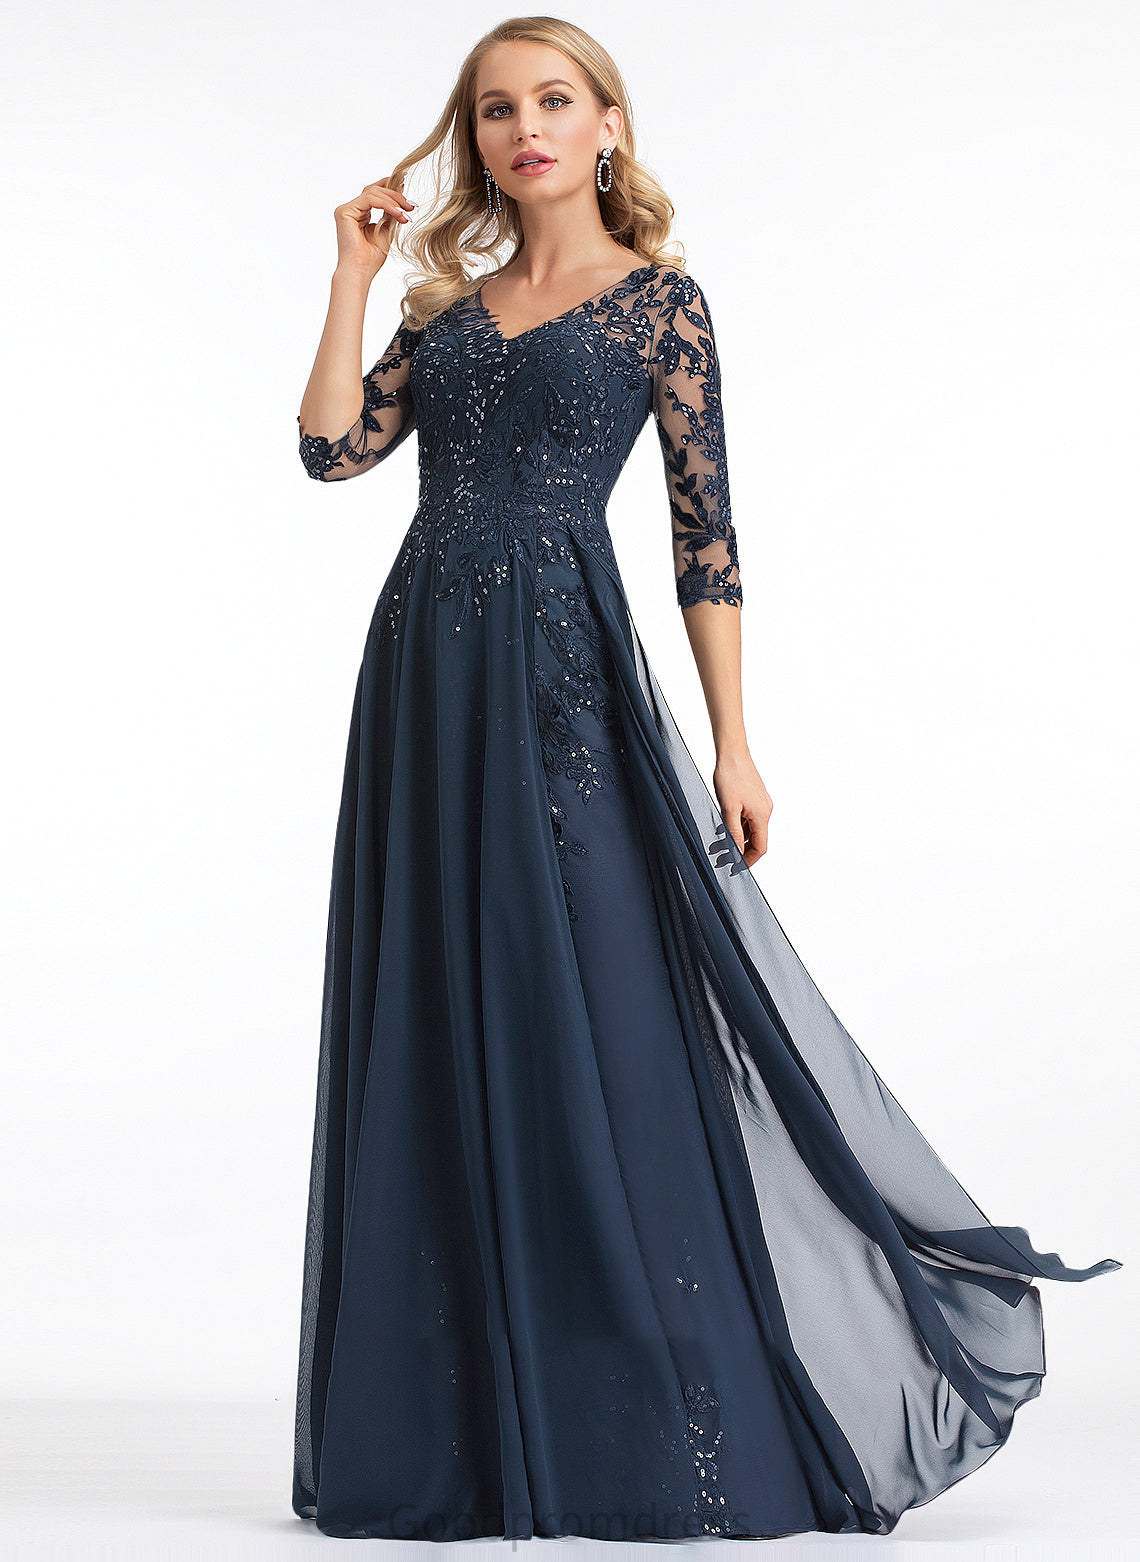 A-Line Sequins Floor-Length V-neck With Jaiden Prom Dresses Chiffon